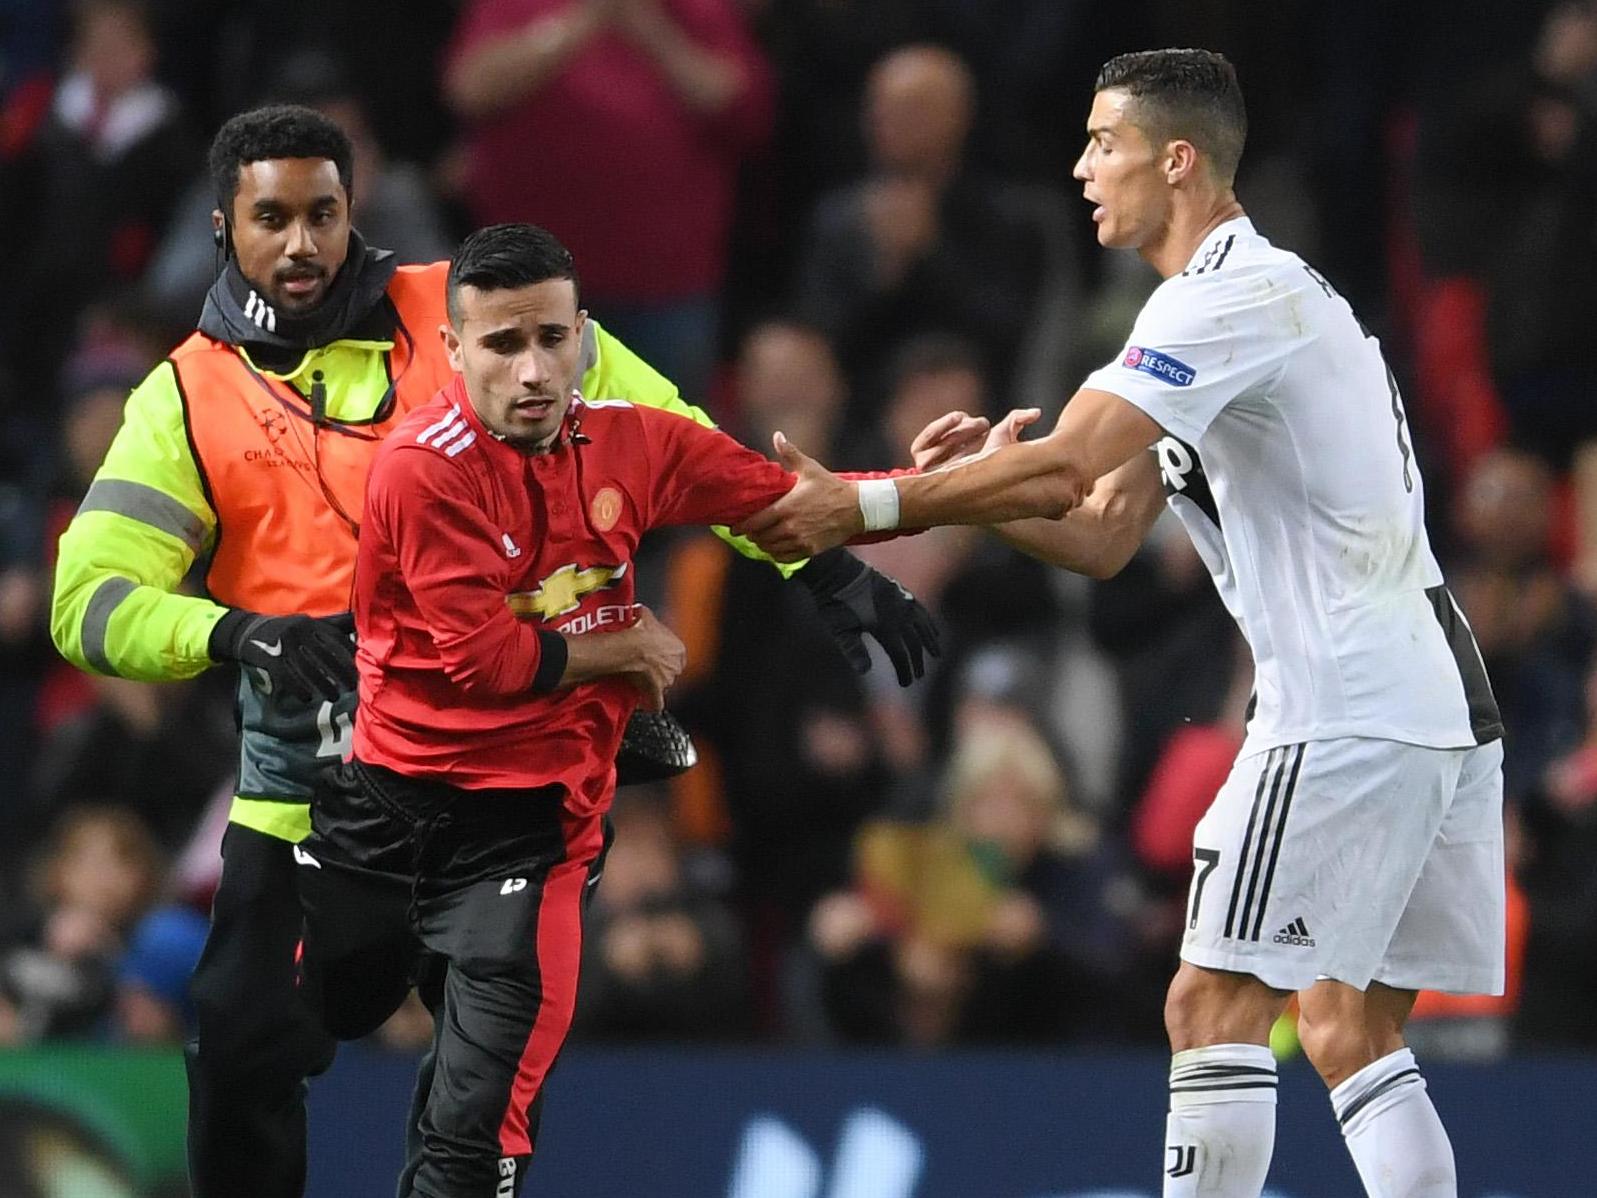 Three pitch invaders attempted to get close to Cristiano Ronaldo